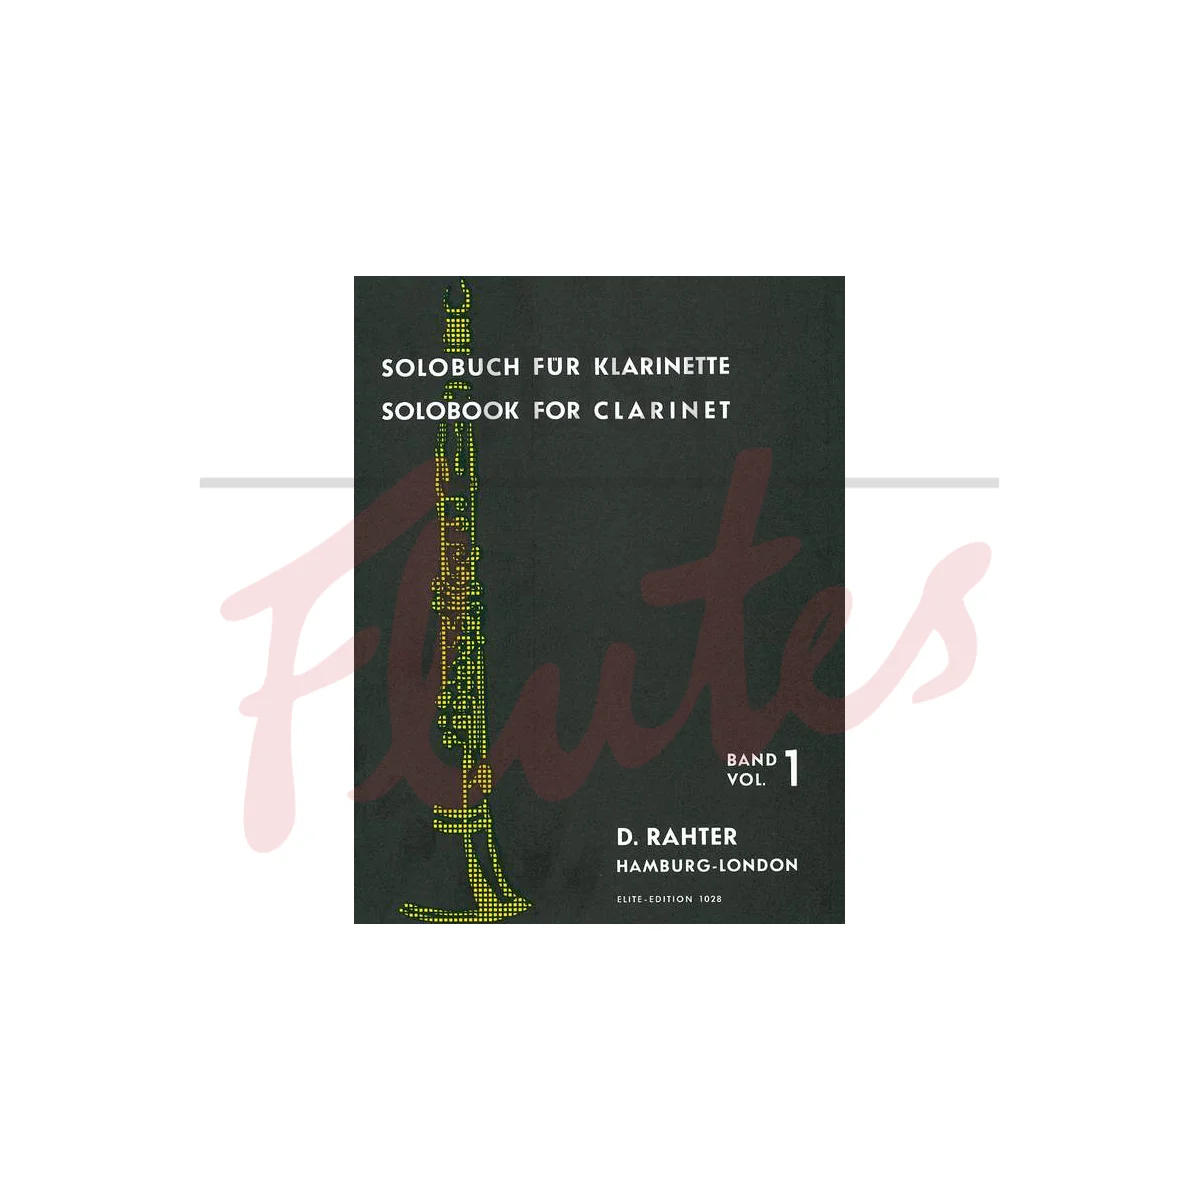 Solobook for Clarinet, Vol. 1